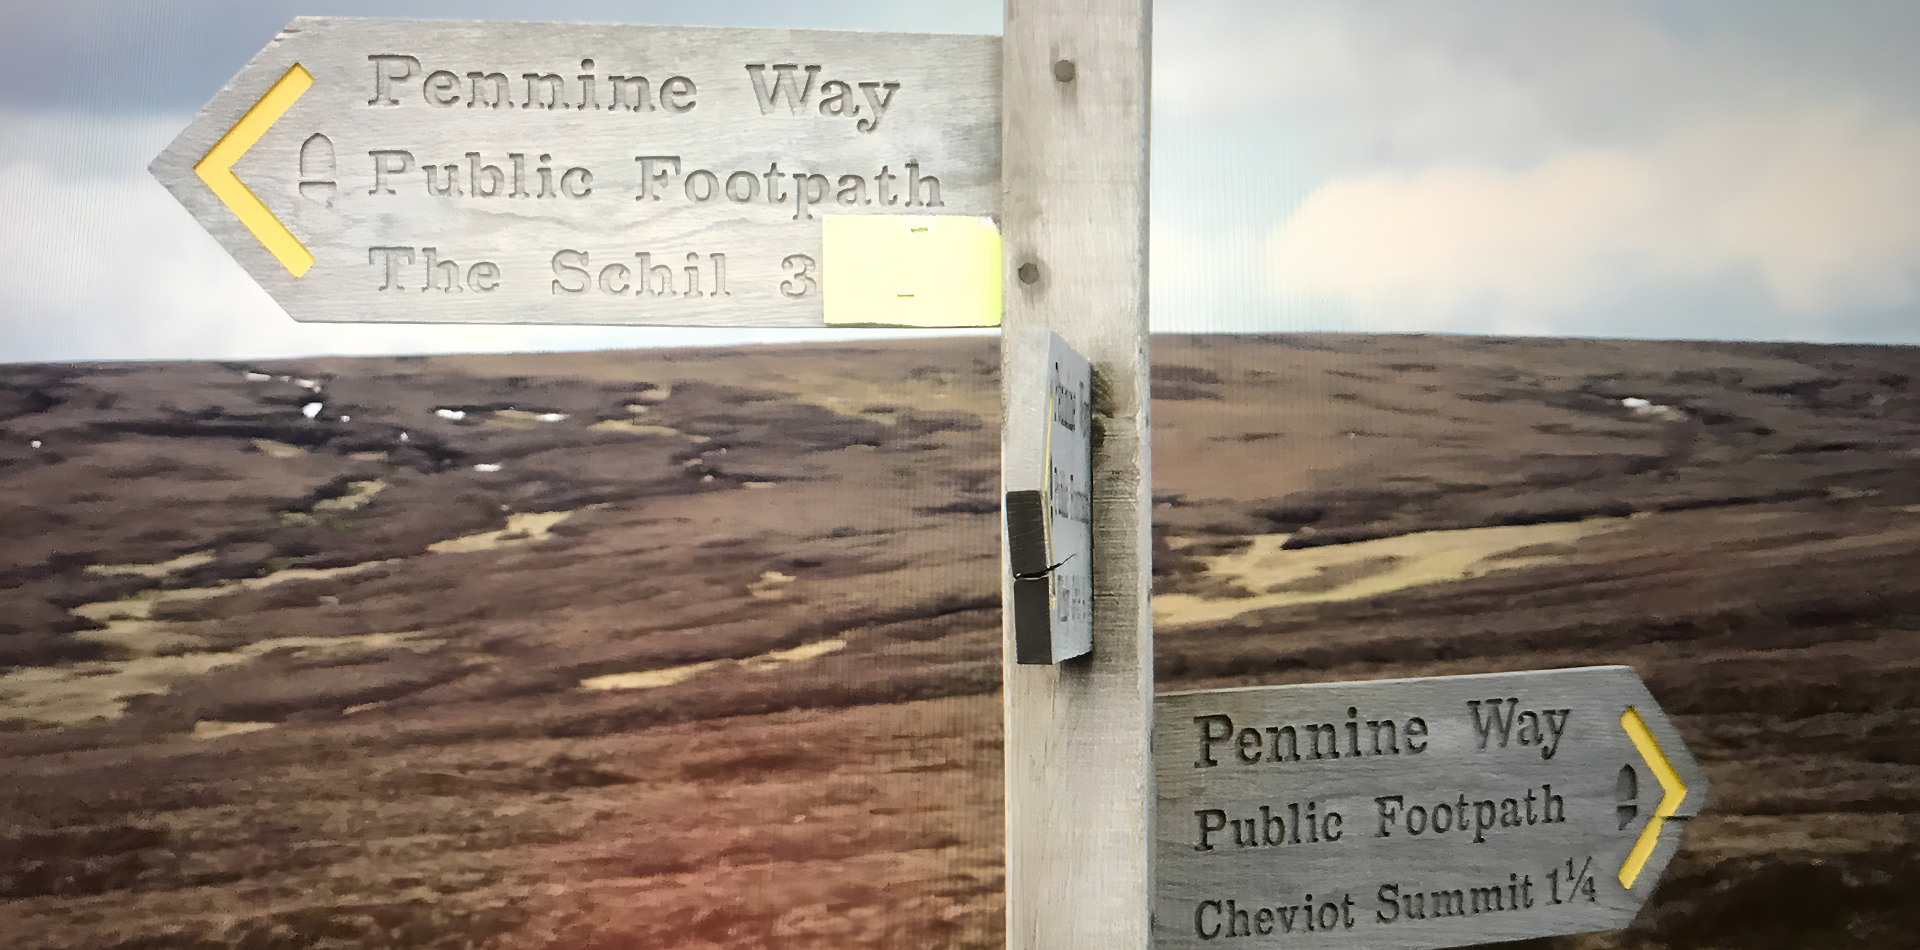 Signpost for the Pennine Way Public Footpath